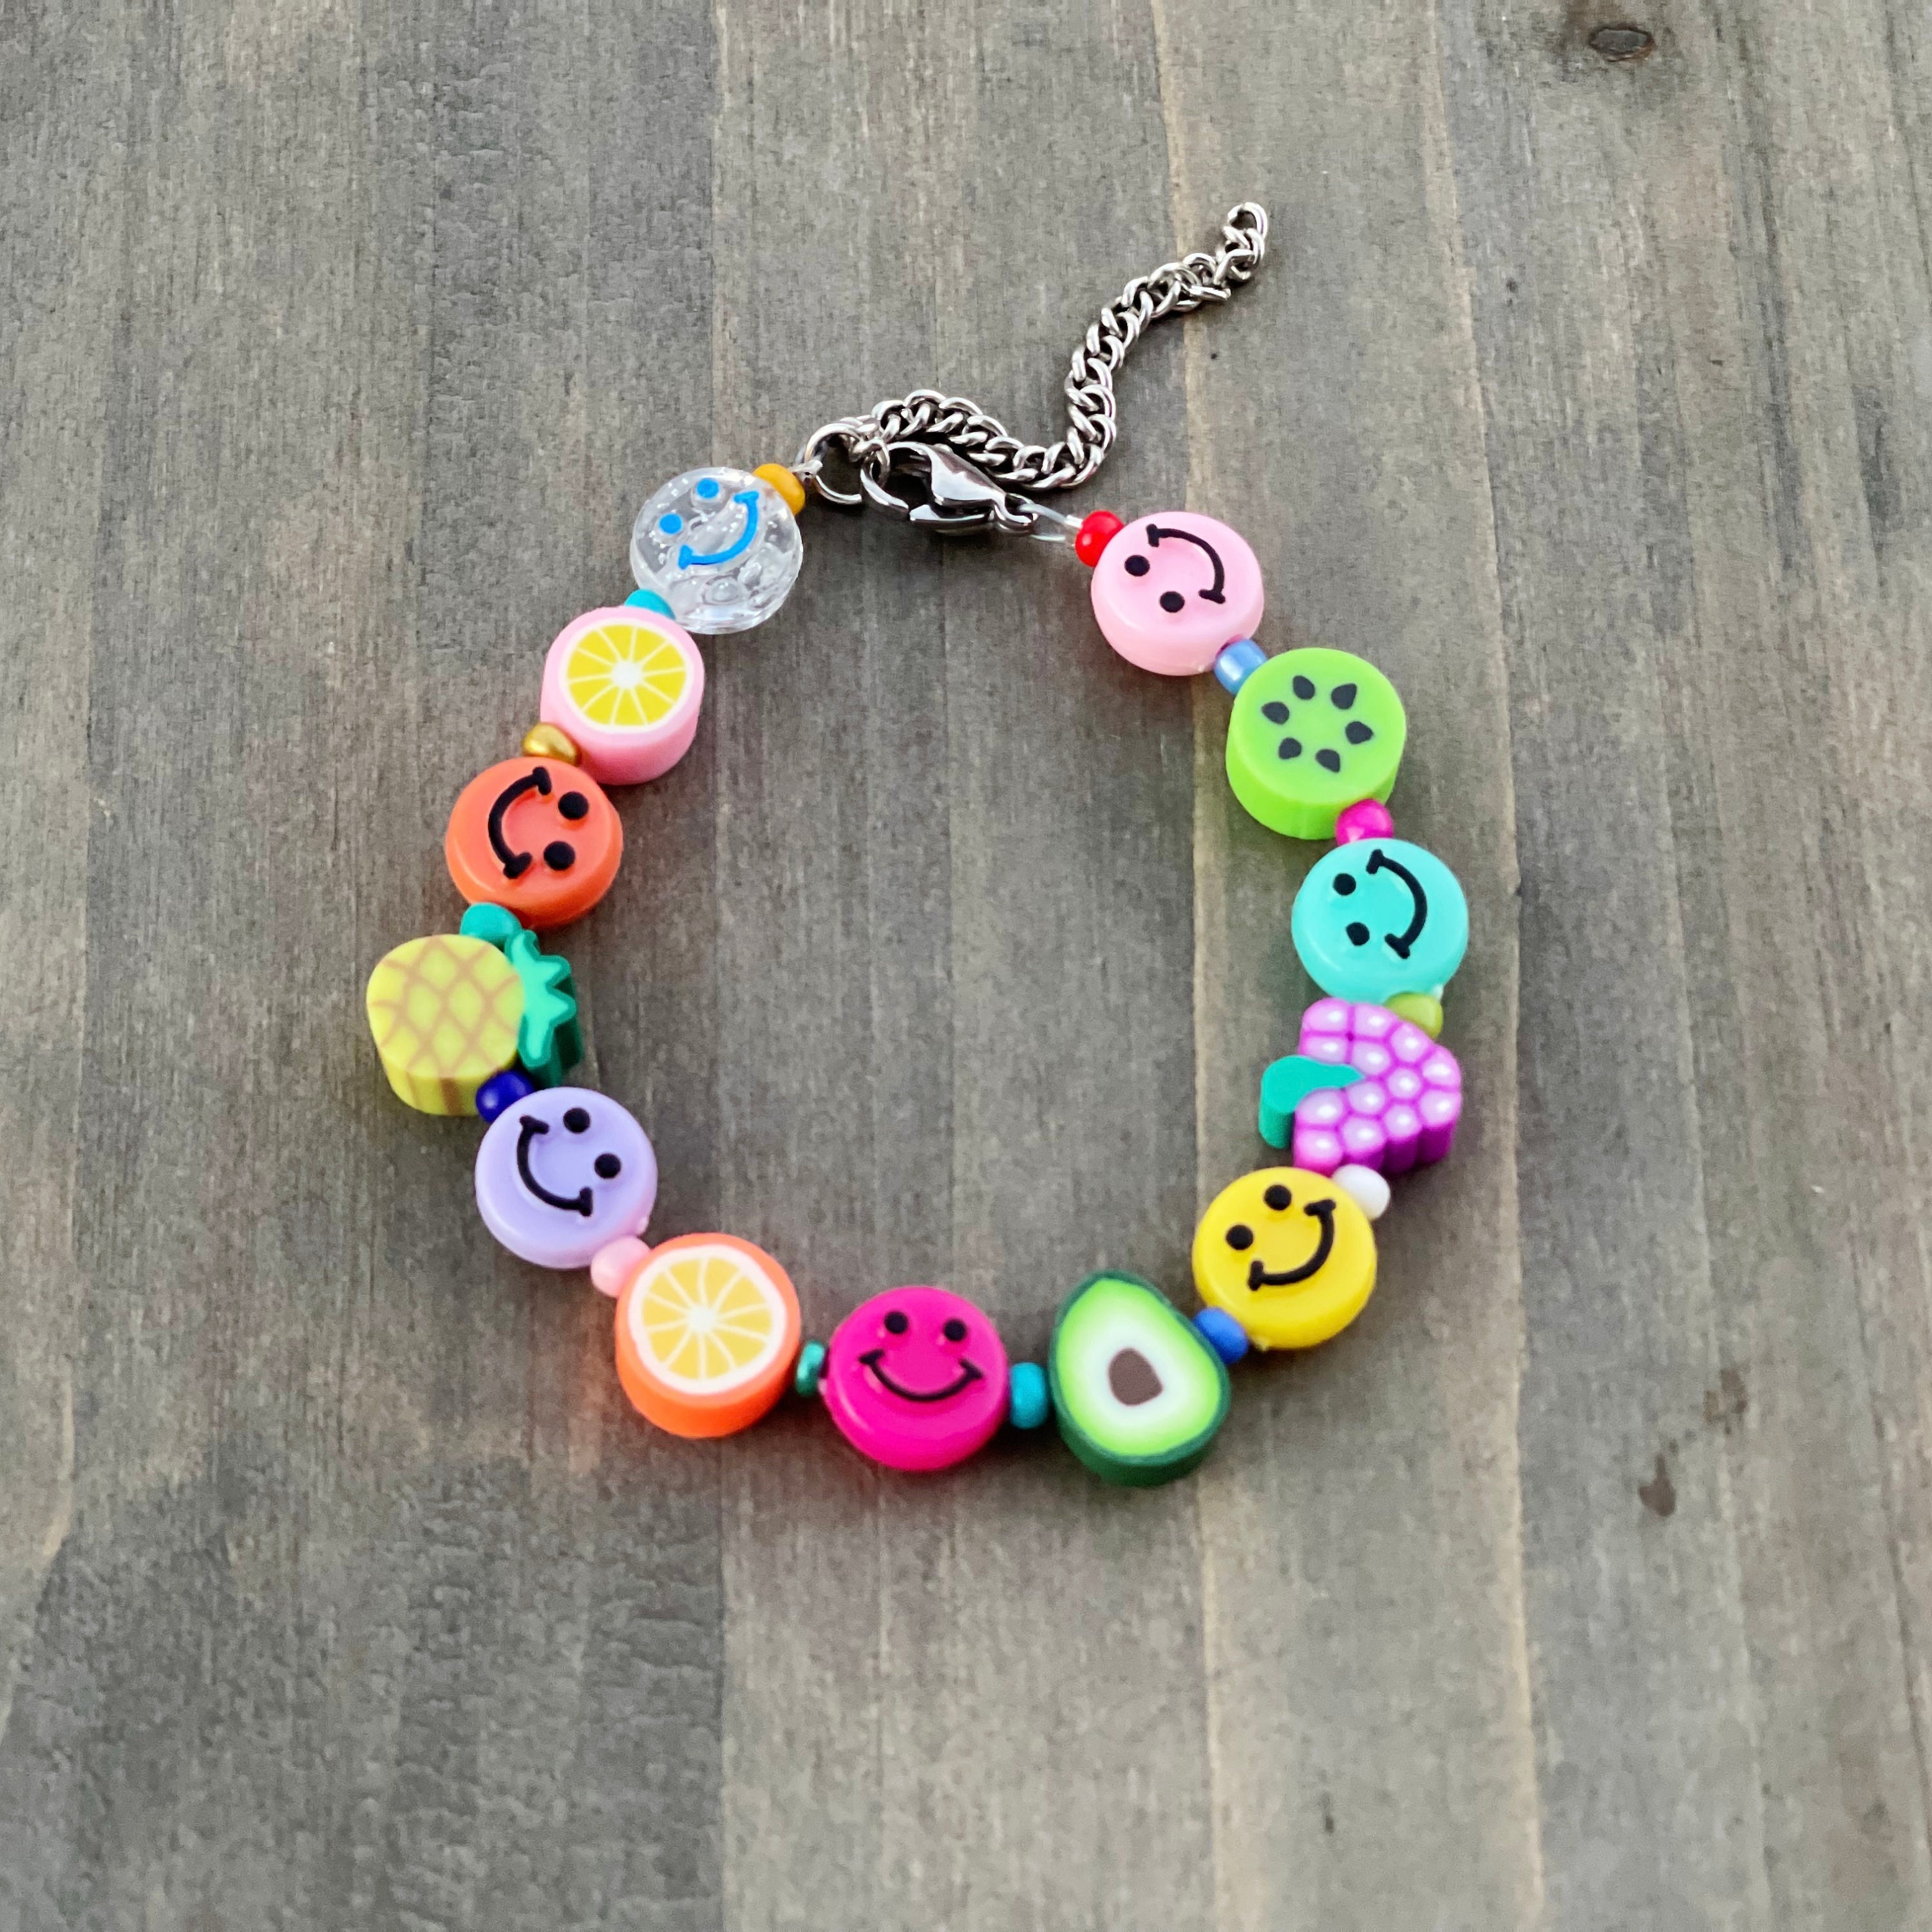 Bracelets with Smileys and Polymer Clay Beads - Beads & Basics